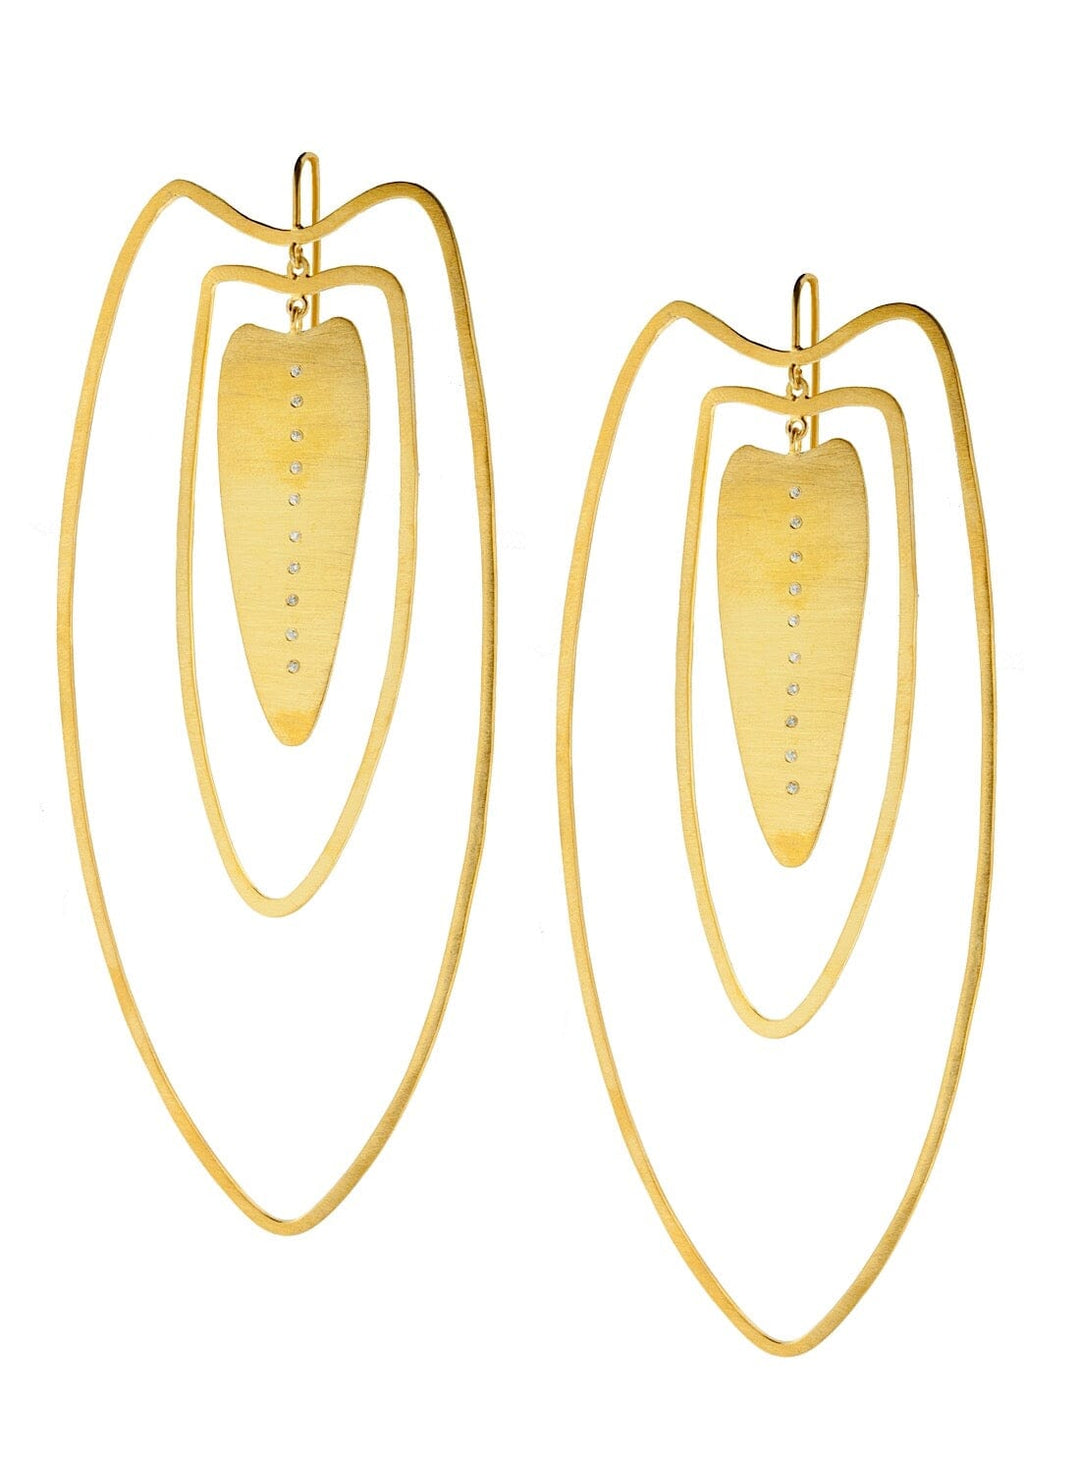 Anaire Earrings in Gold with White Sapphires Earrings YBDFinds 